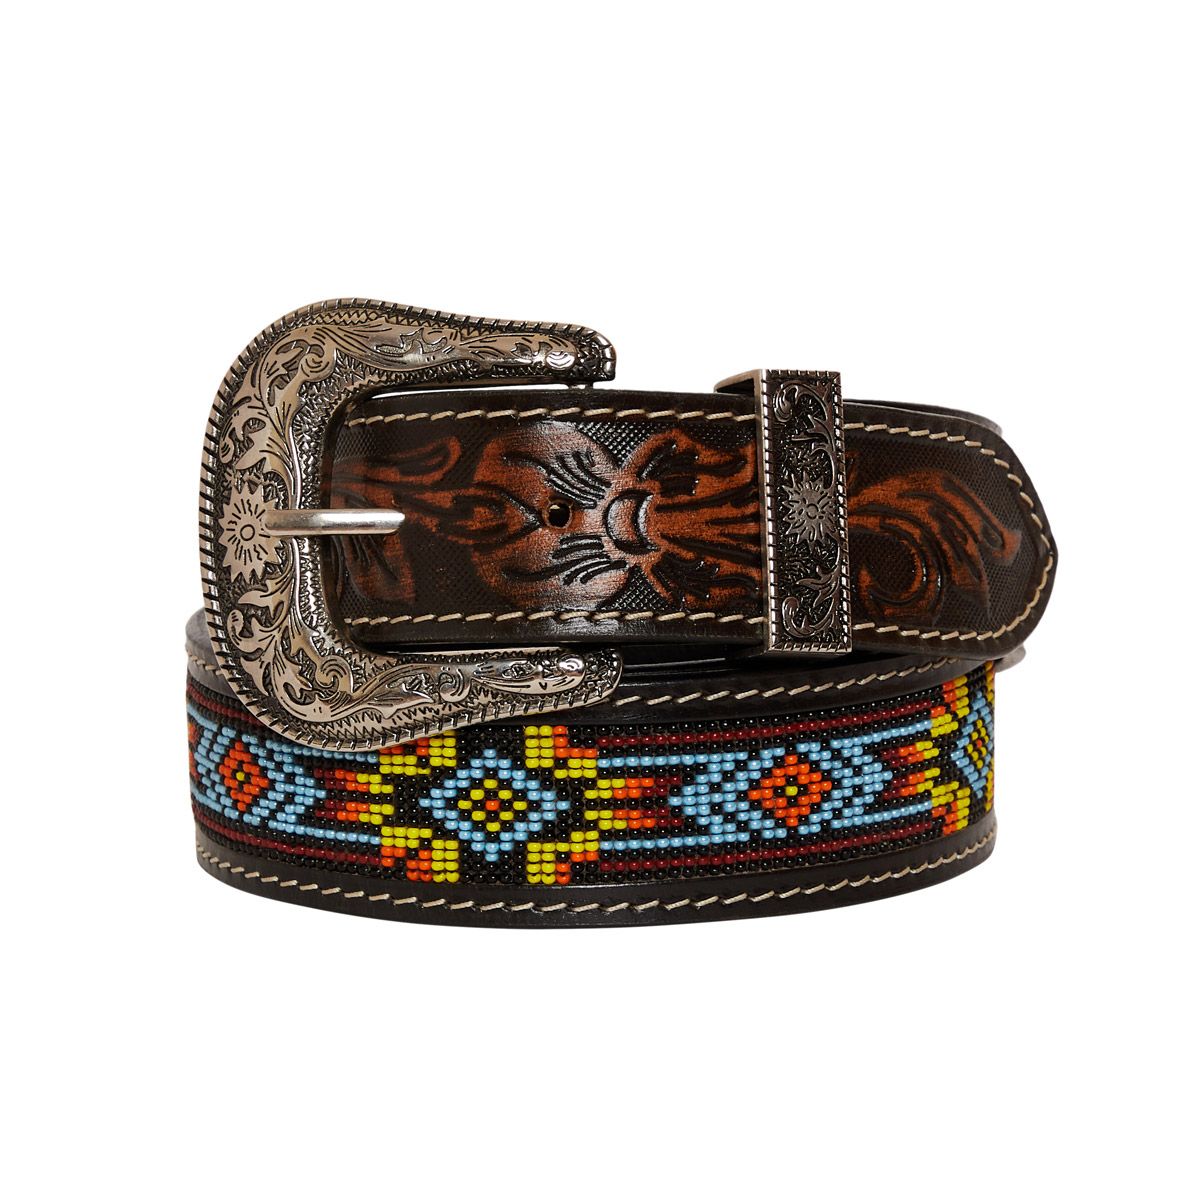 Polly Beaded & Hand-Tooled Leather Belt